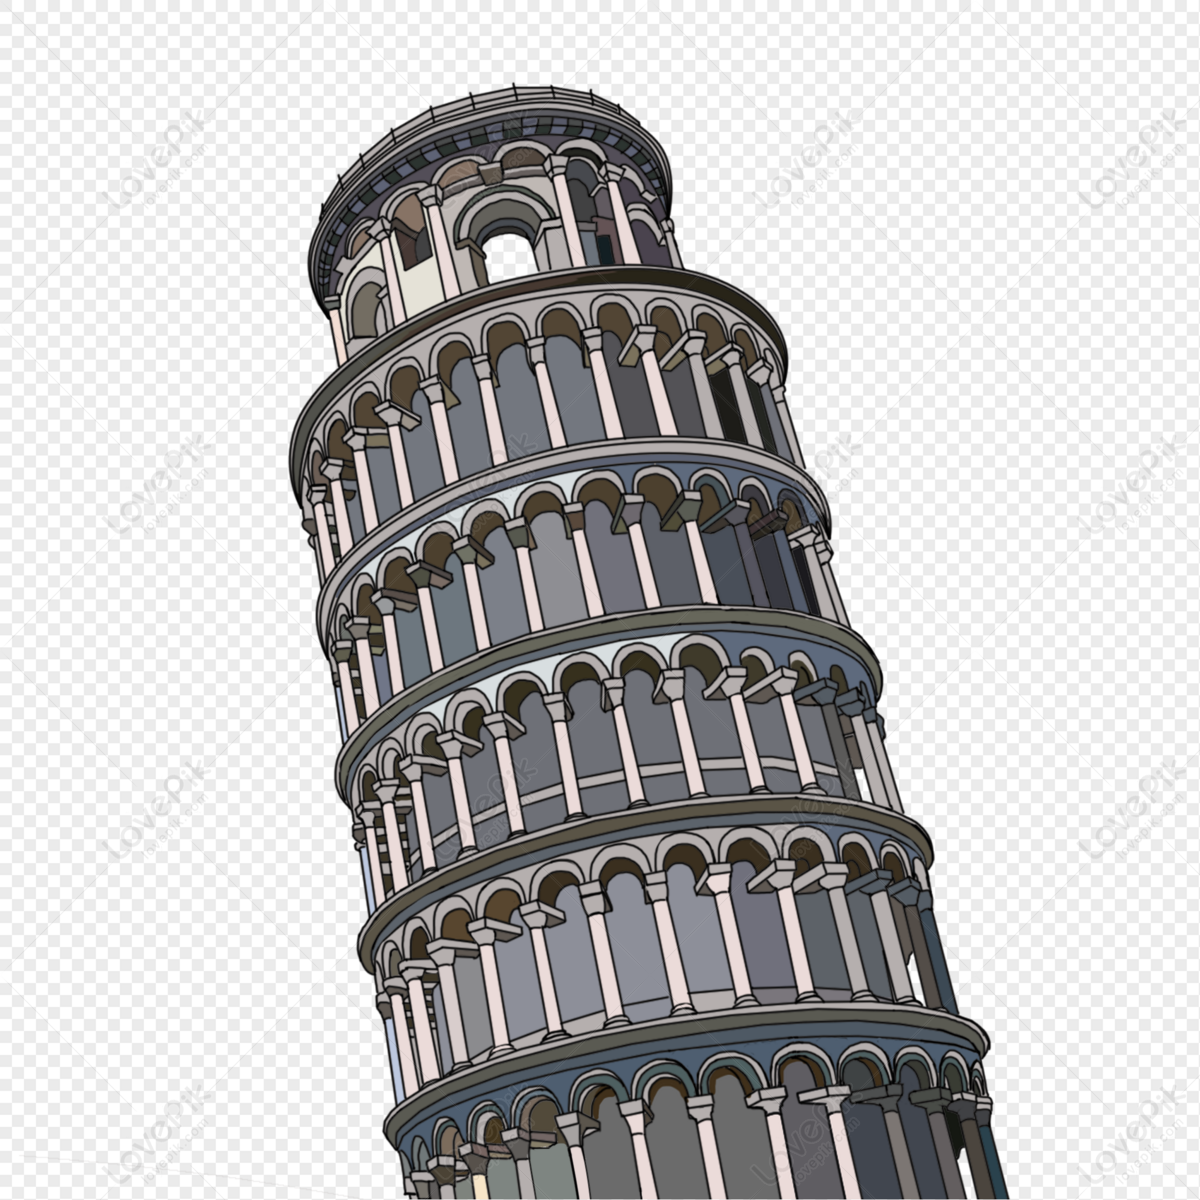 Cartoon Leaning Tower Of Pisa PNG Transparent And Clipart Image For Free  Download - Lovepik | 401571796